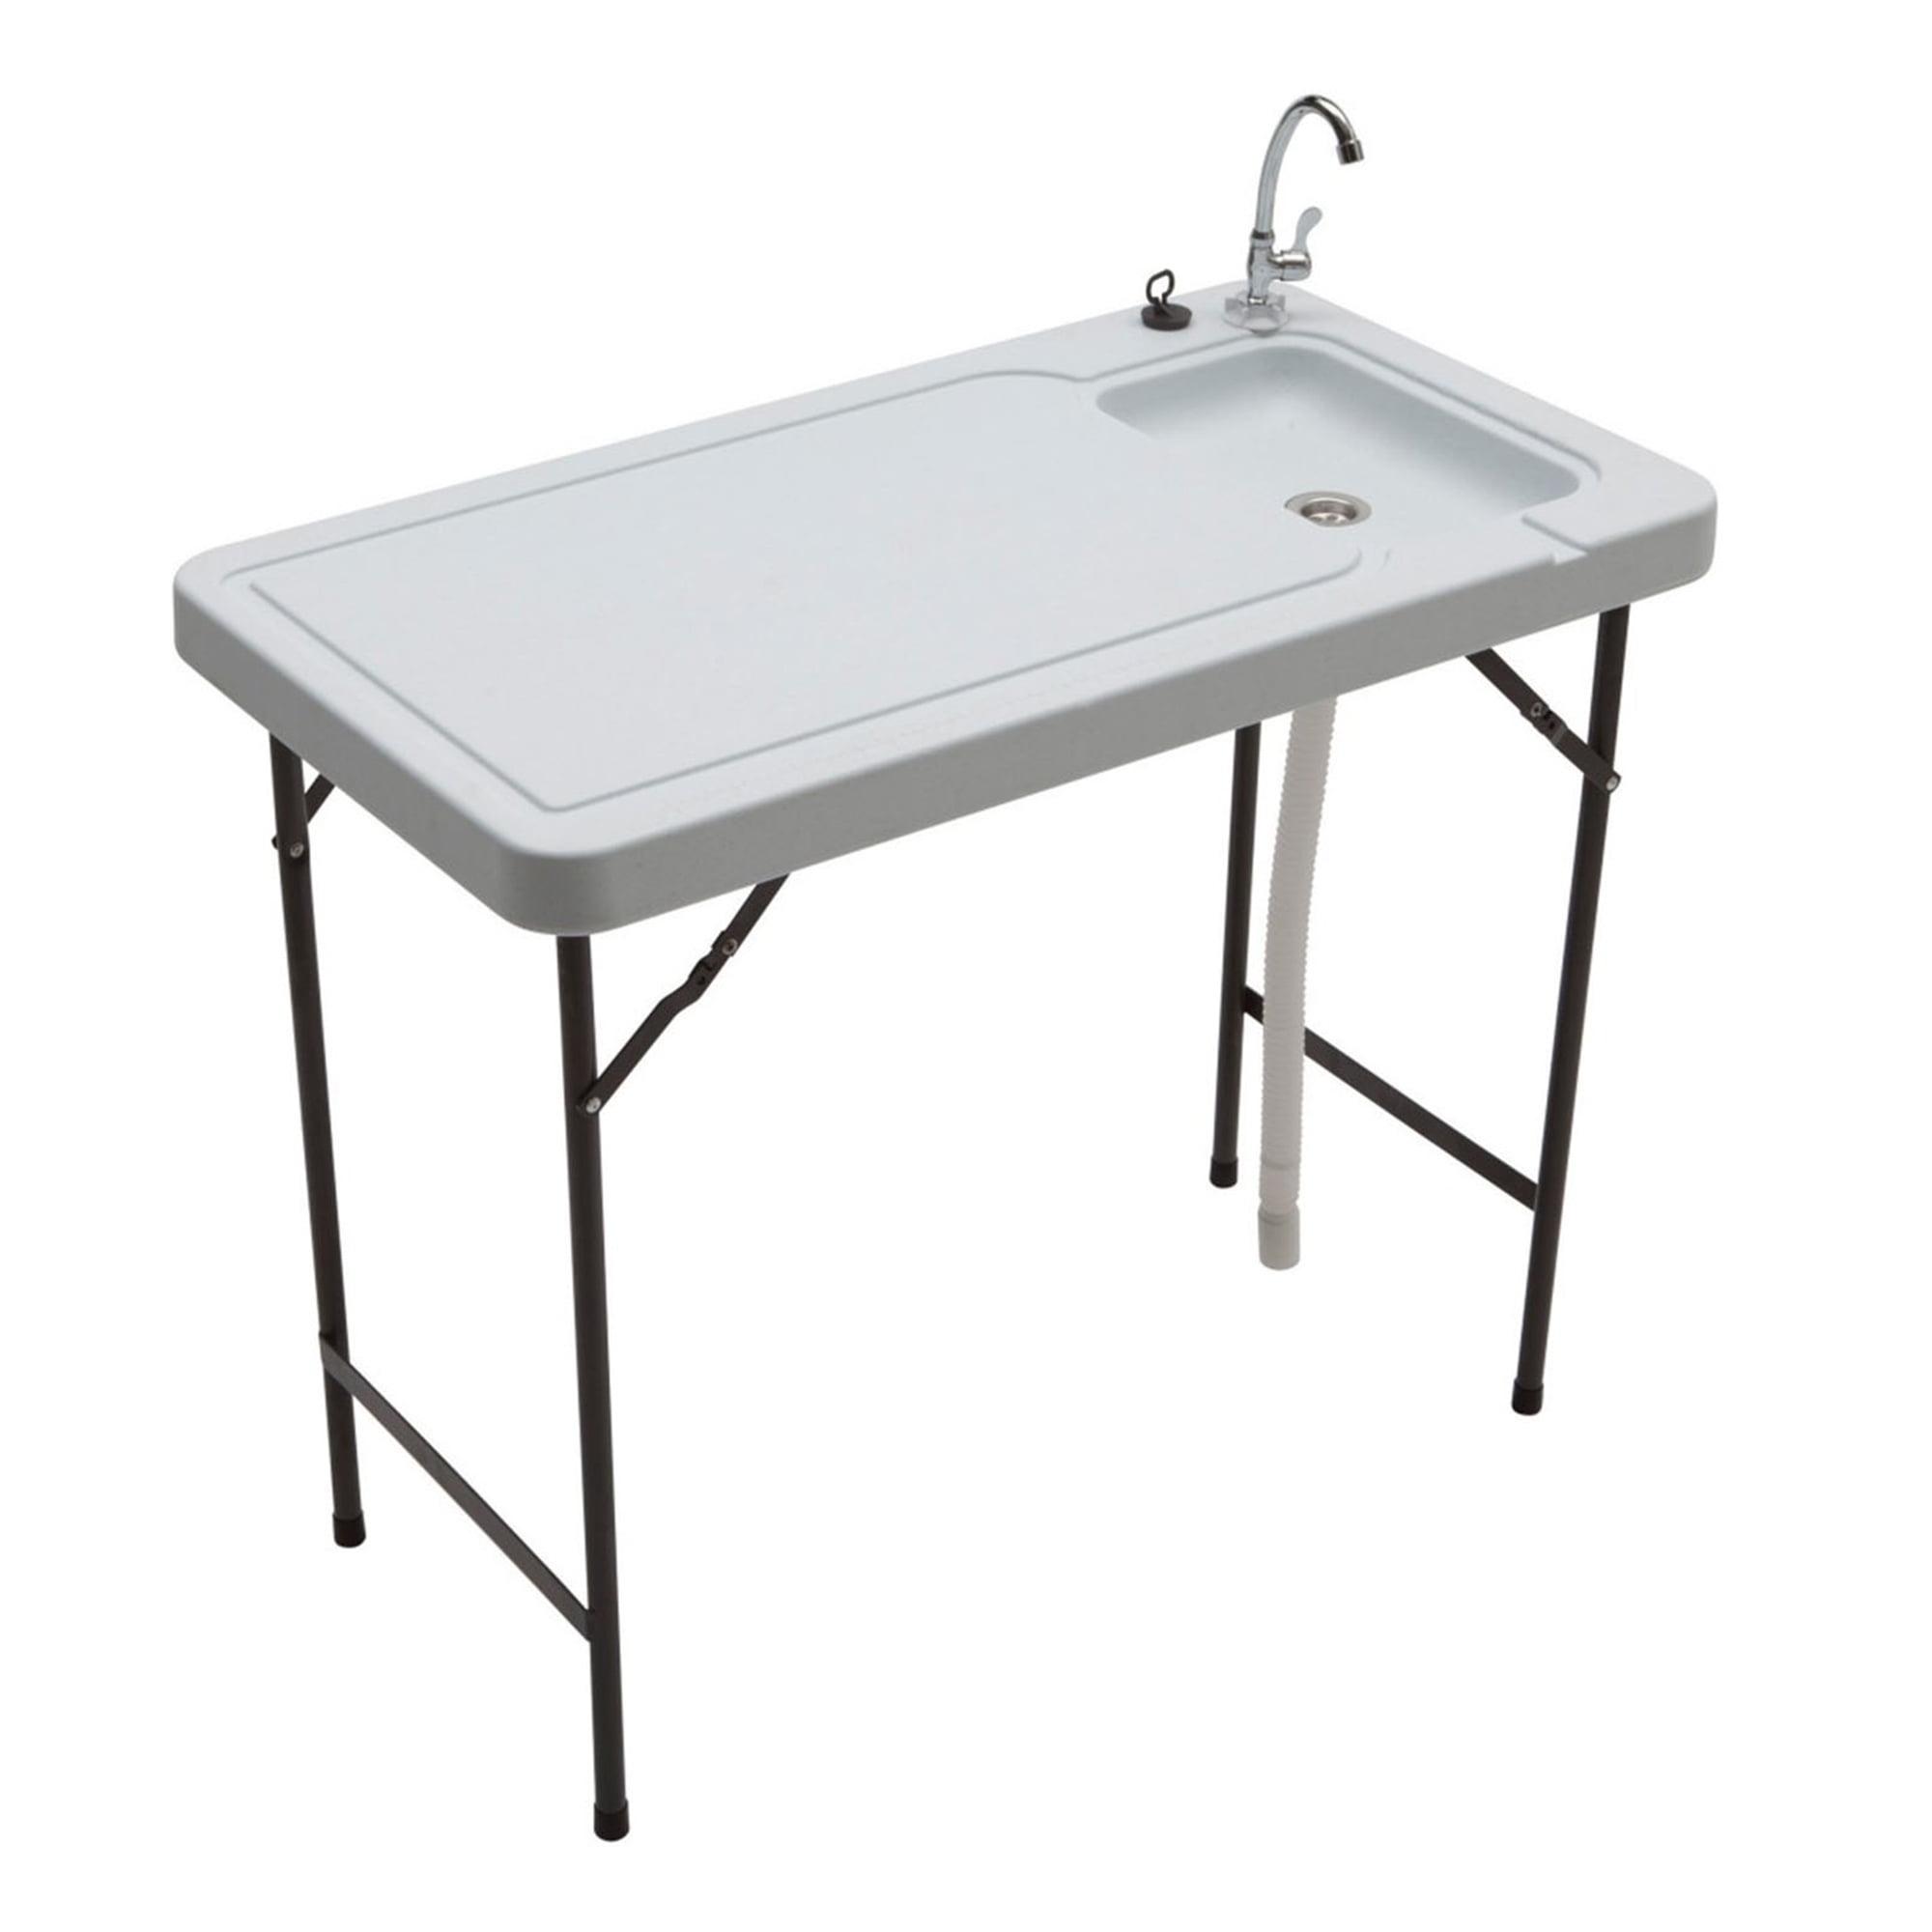 Outdoor Folding Fish & Game Cleaning Table with Quick-Connect Faucet